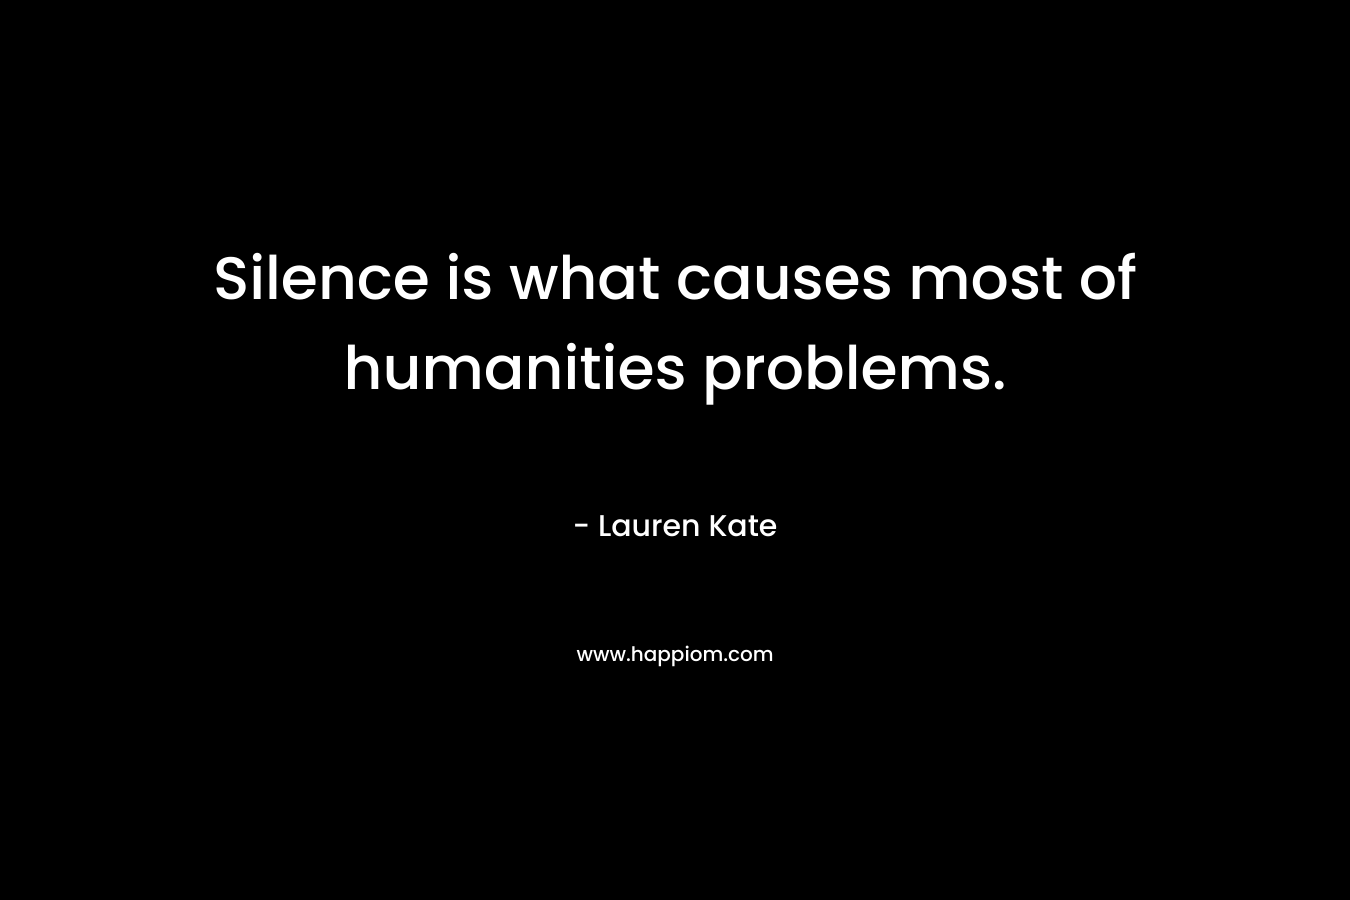 Silence is what causes most of humanities problems.